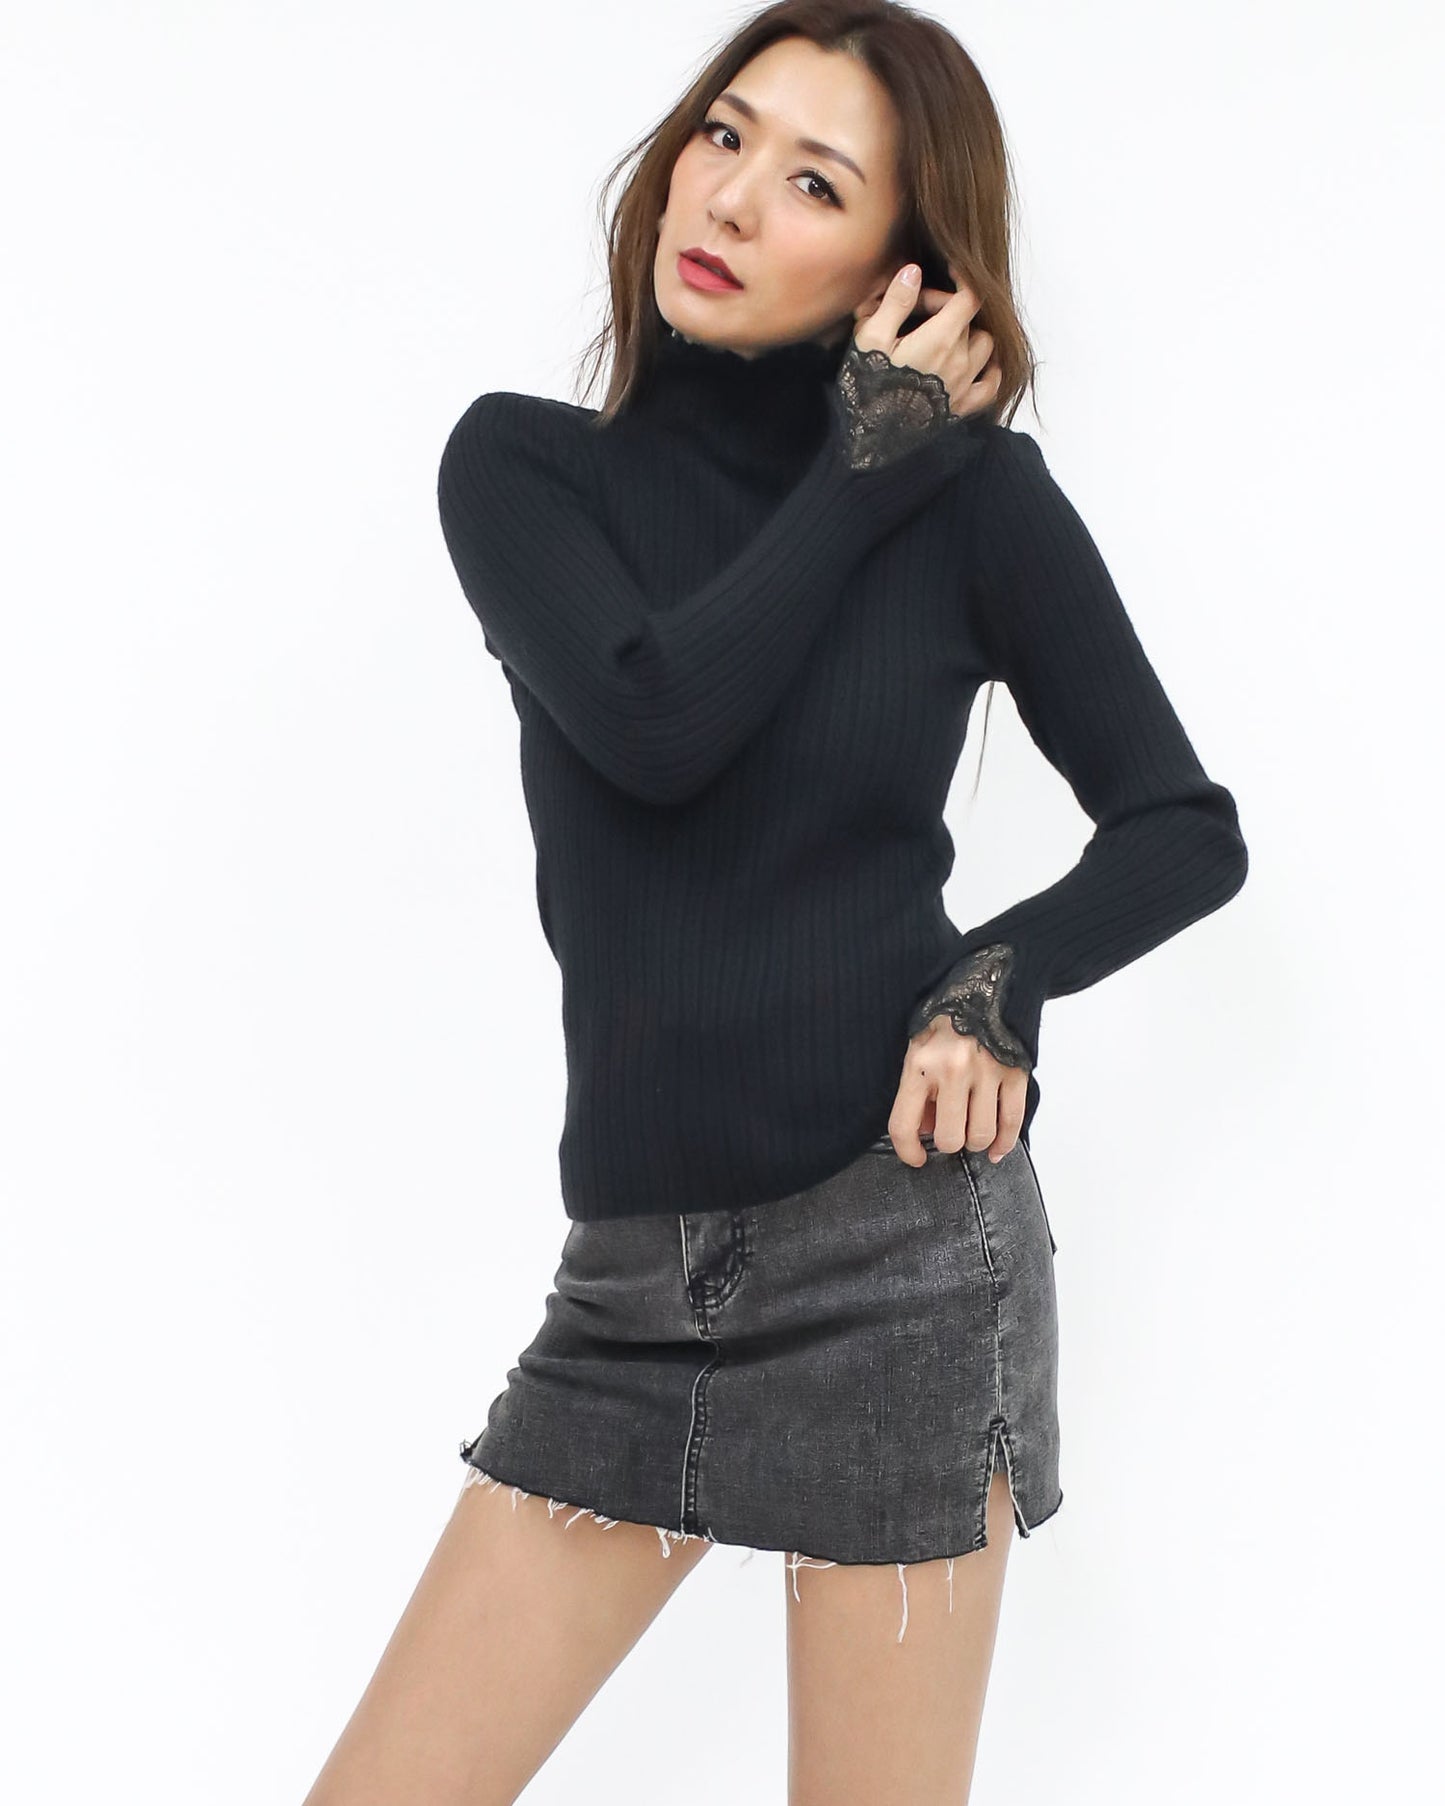 black lace cuff & high neck knitted top *pre-orde*